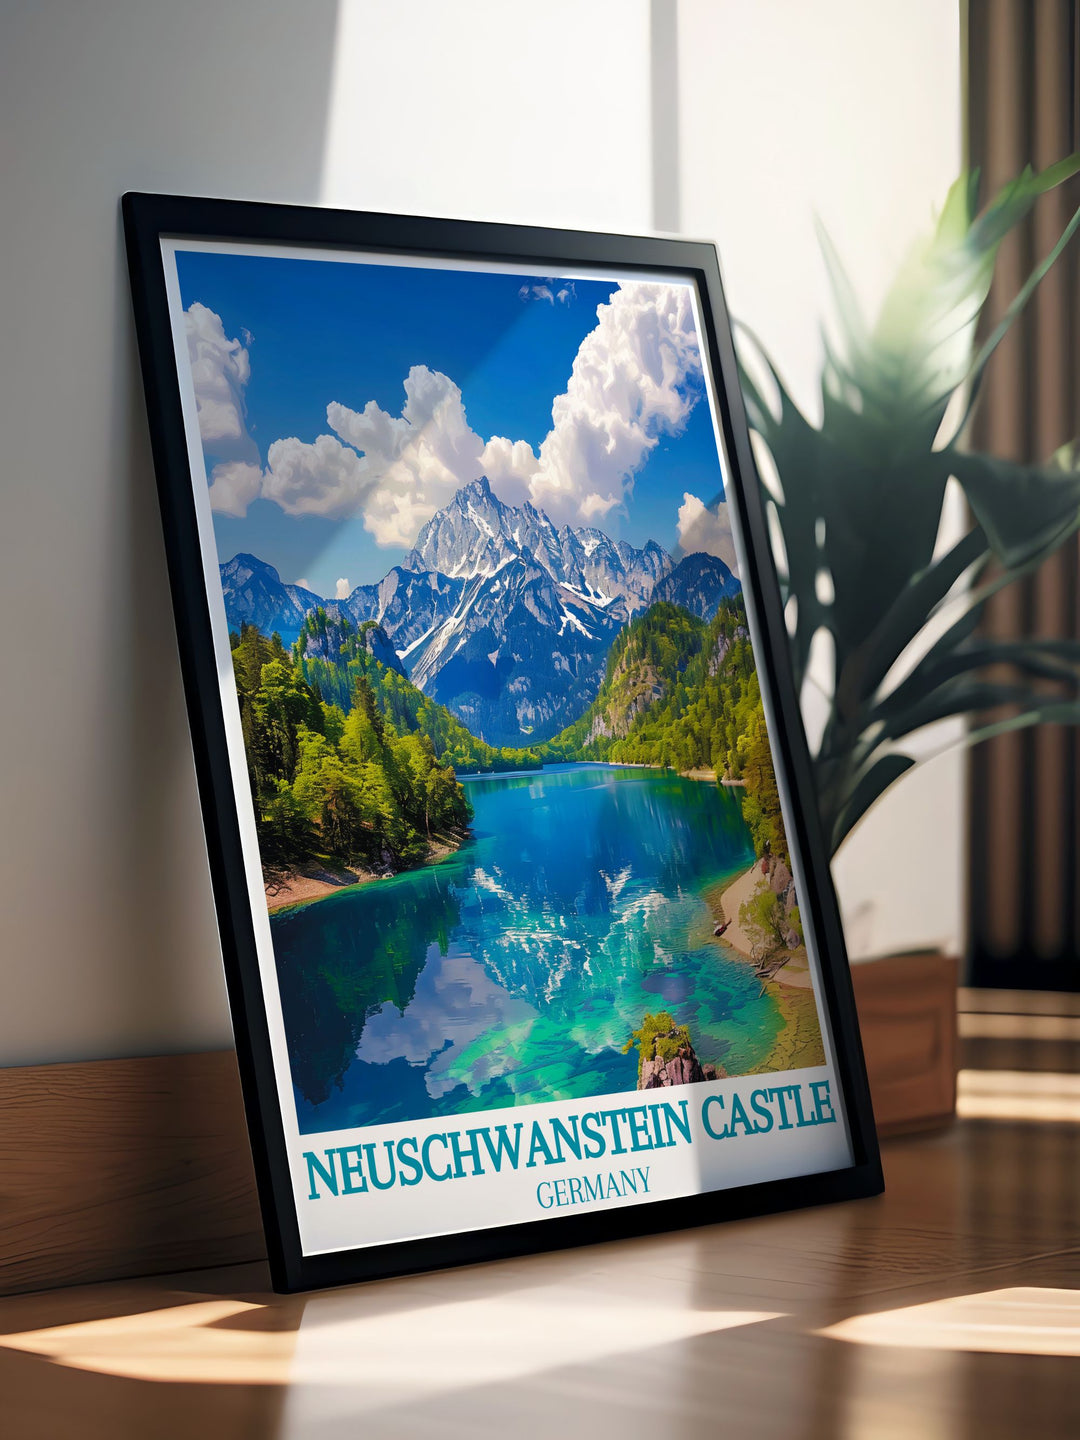 Featuring the scenic vistas of Neuschwanstein Castle, this poster offers a visual representation of one of Germanys most beautiful and iconic landmarks, ideal for those who cherish cultural and historical destinations.